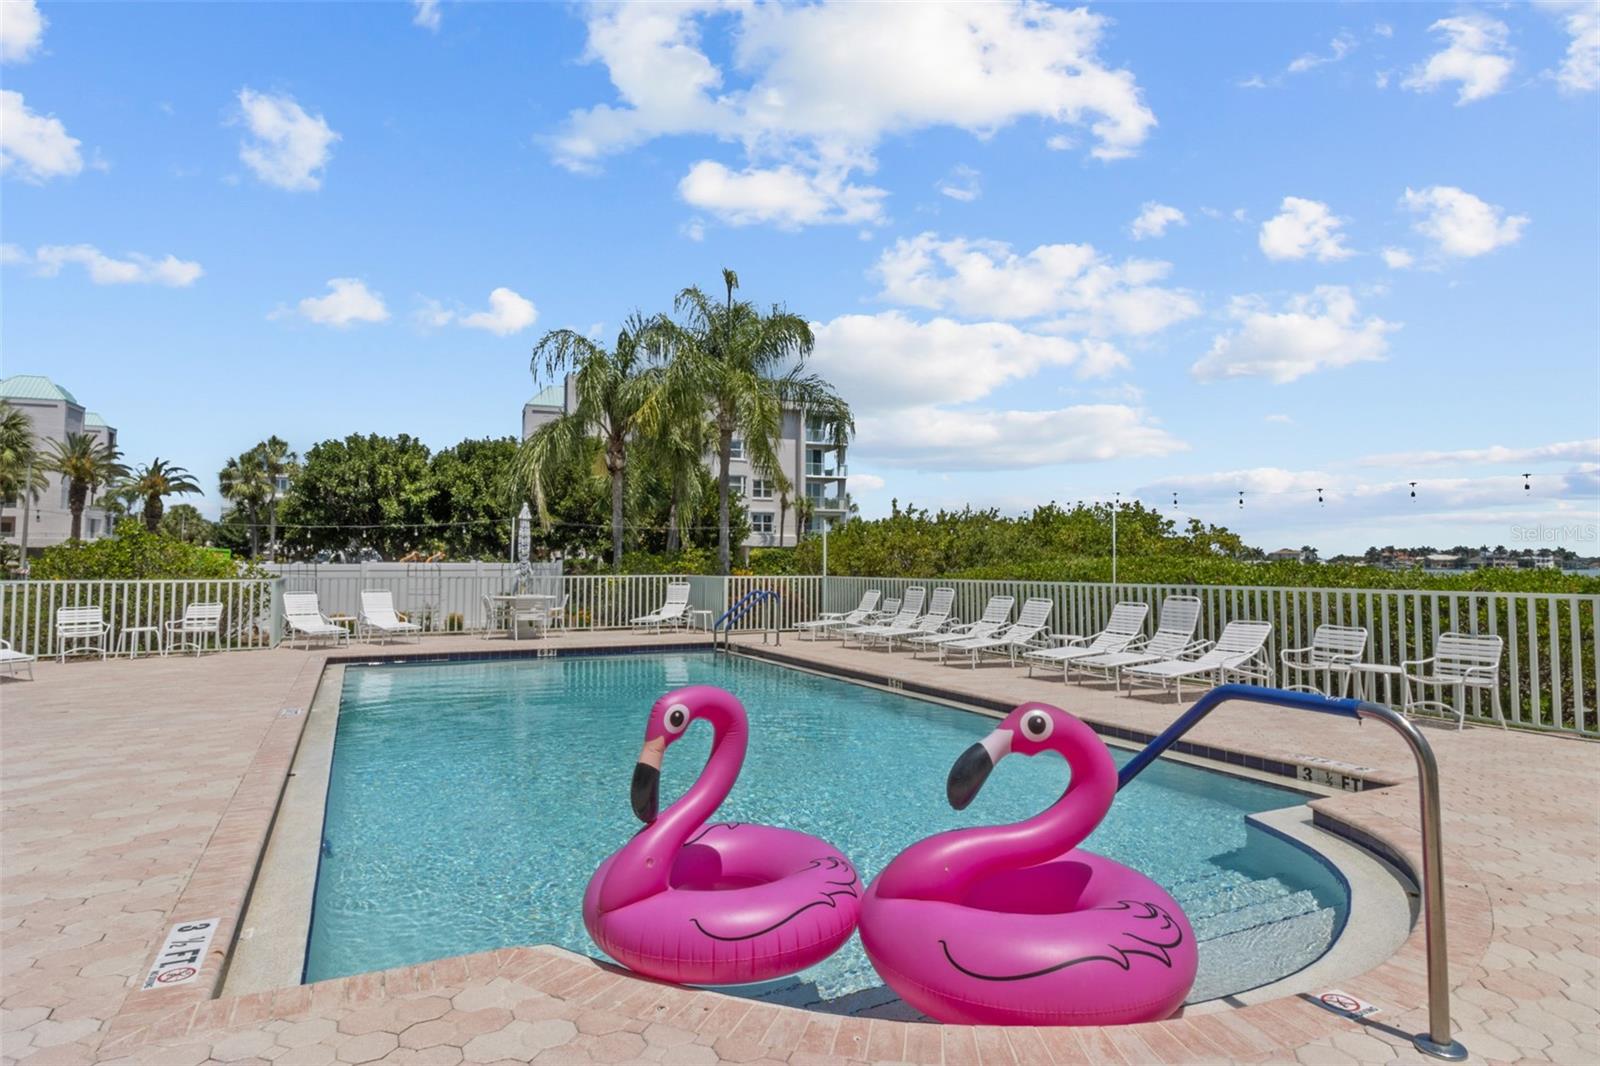 The year round pool is only steps away from the condominium!  Enjoy seasonal enjoyment in the pool overlooking the water!  It just doesn't get better than this!